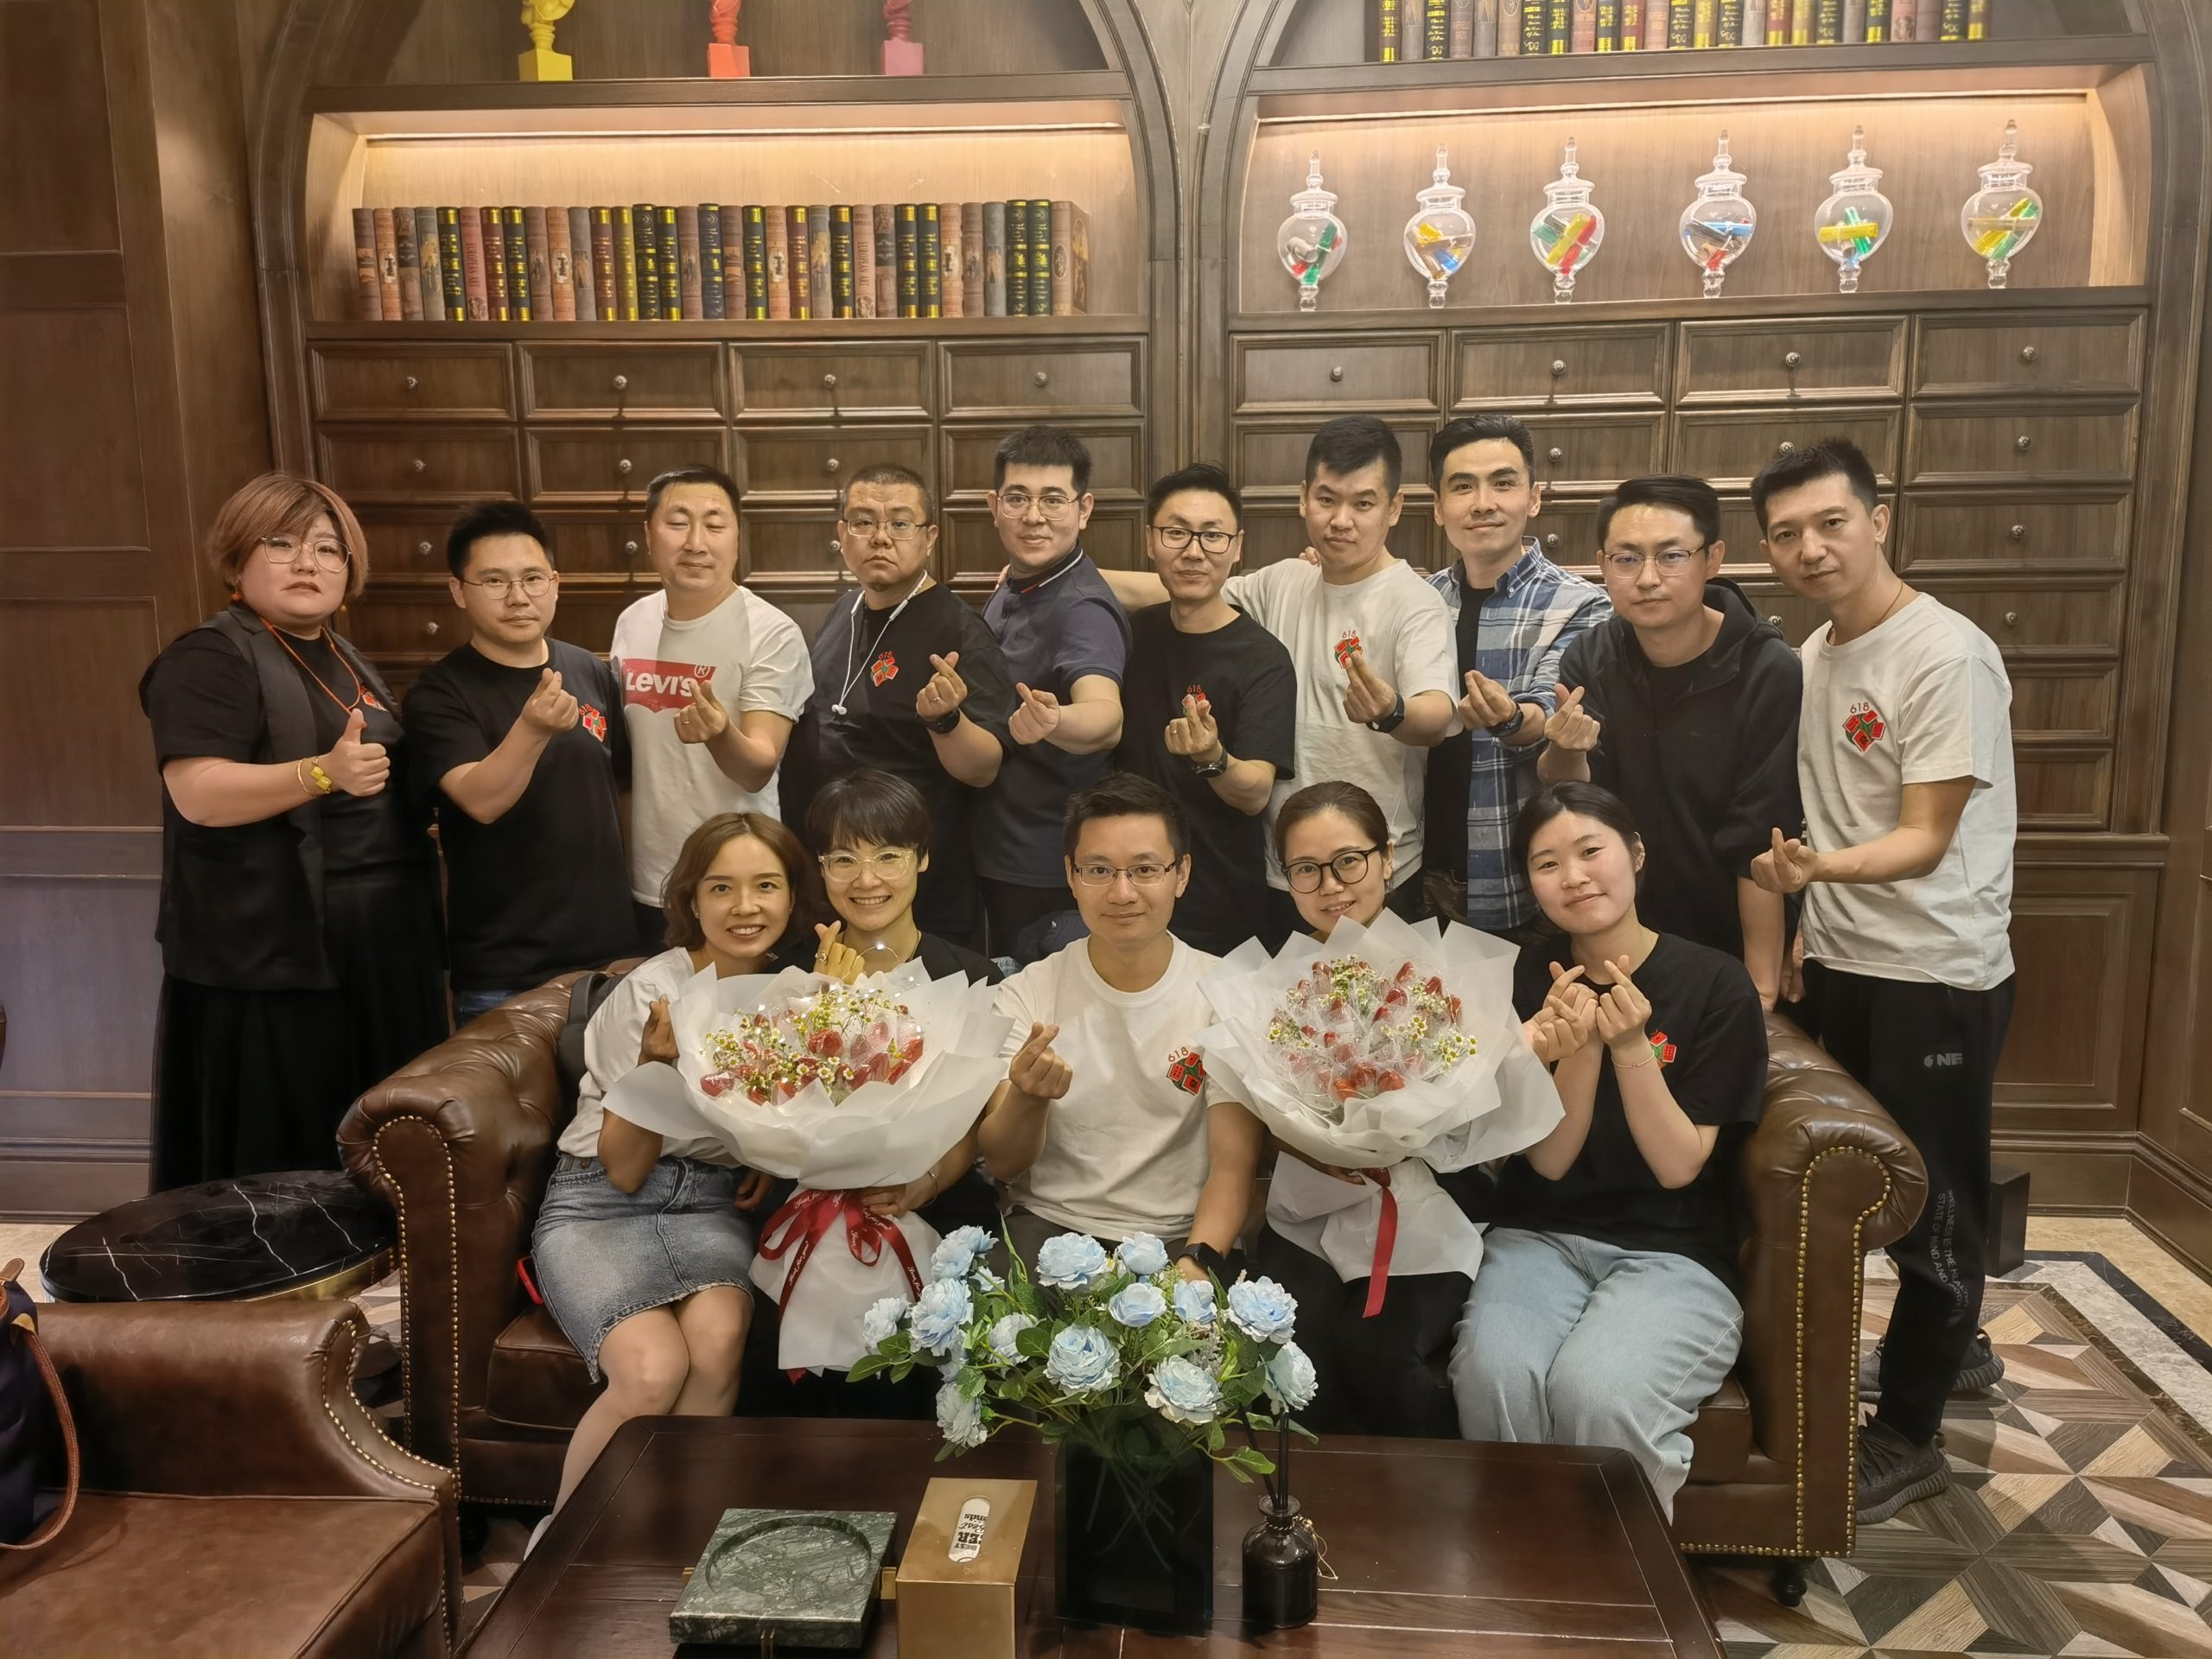 On May 18th, Ye (middle, front row) is pictured with part of his team at JD Fresh, celebrating two colleagues who recently reached five-year mark at JD  (Lian Li, second from right, and Chunyan Chen, second from left; both in front row)